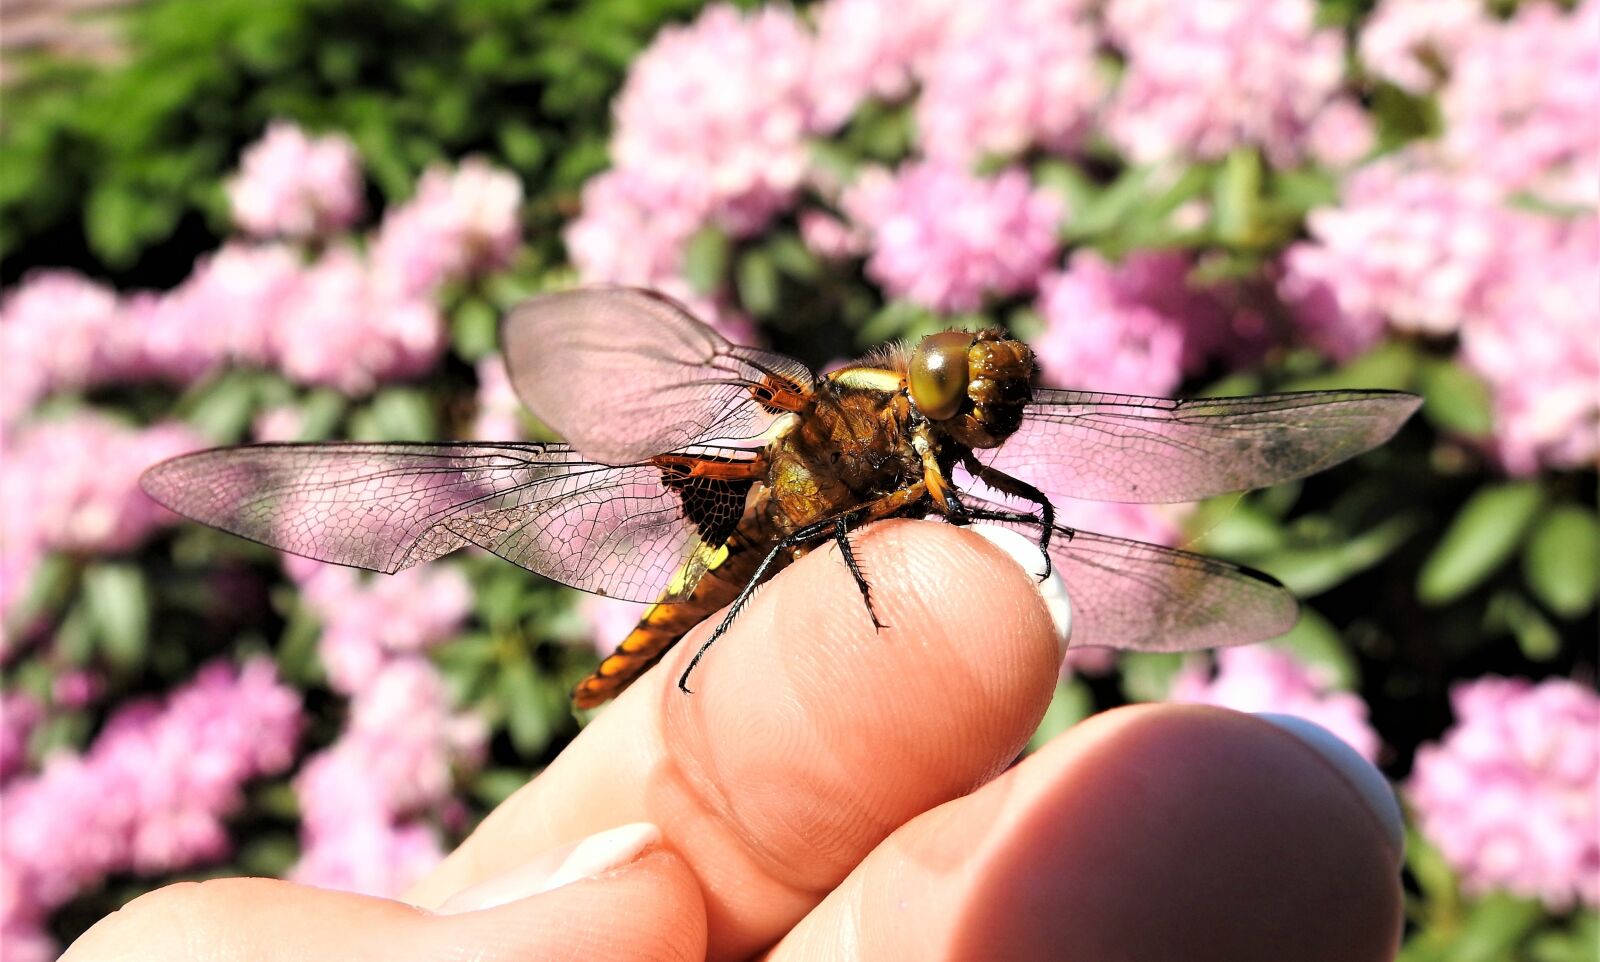 Nikon Coolpix P900 sample photo. Dragonfly, index finger, insect photography